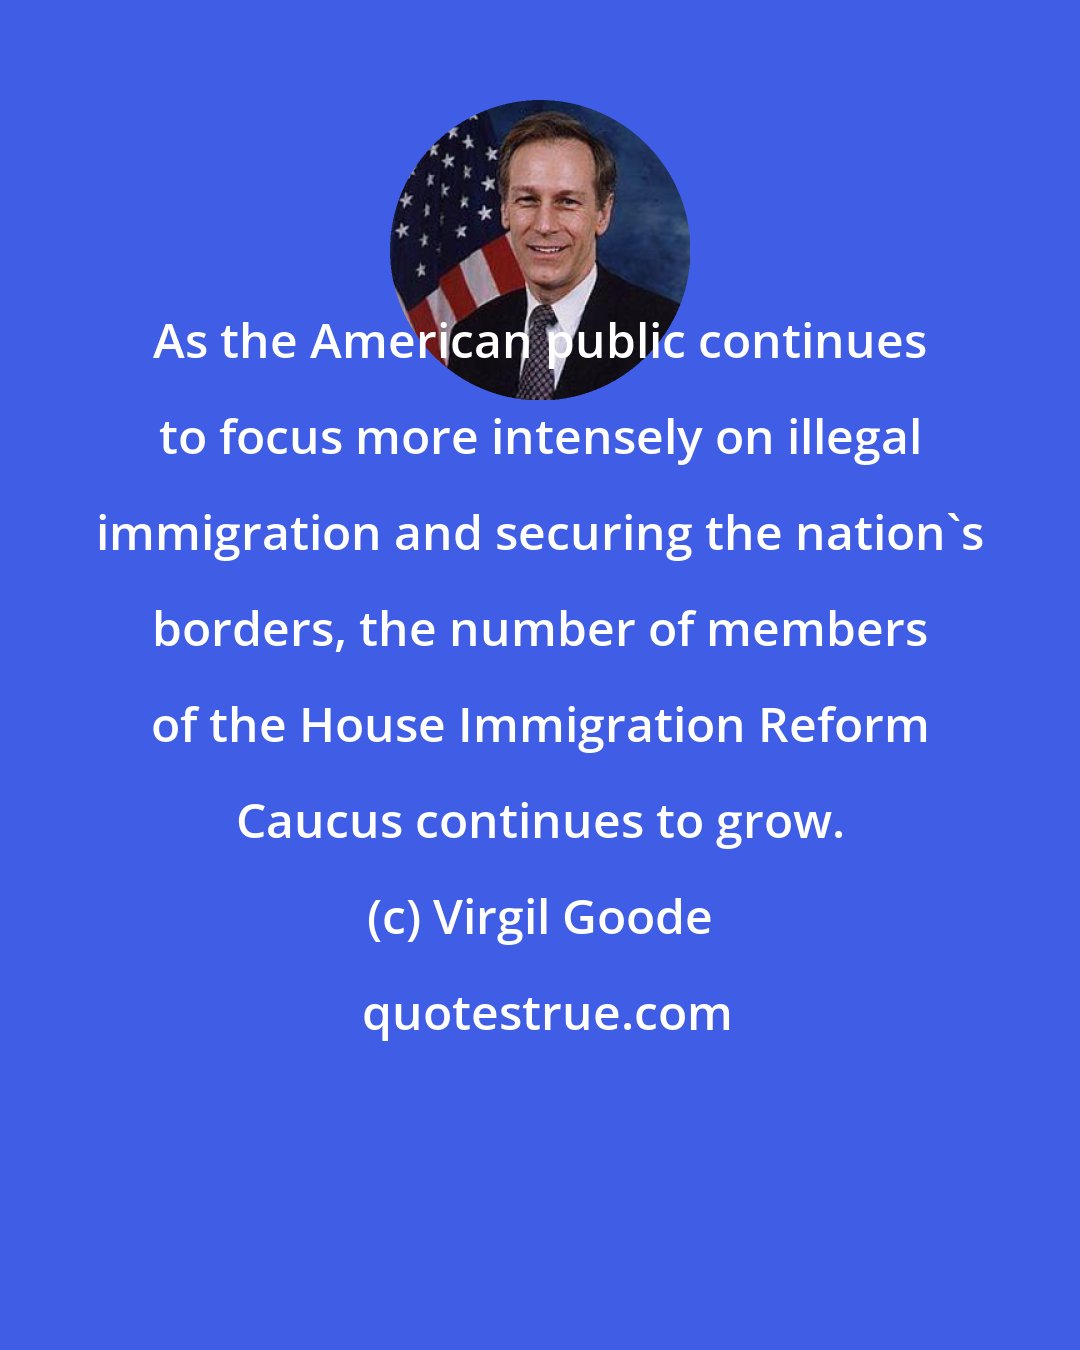 Virgil Goode: As the American public continues to focus more intensely on illegal immigration and securing the nation's borders, the number of members of the House Immigration Reform Caucus continues to grow.